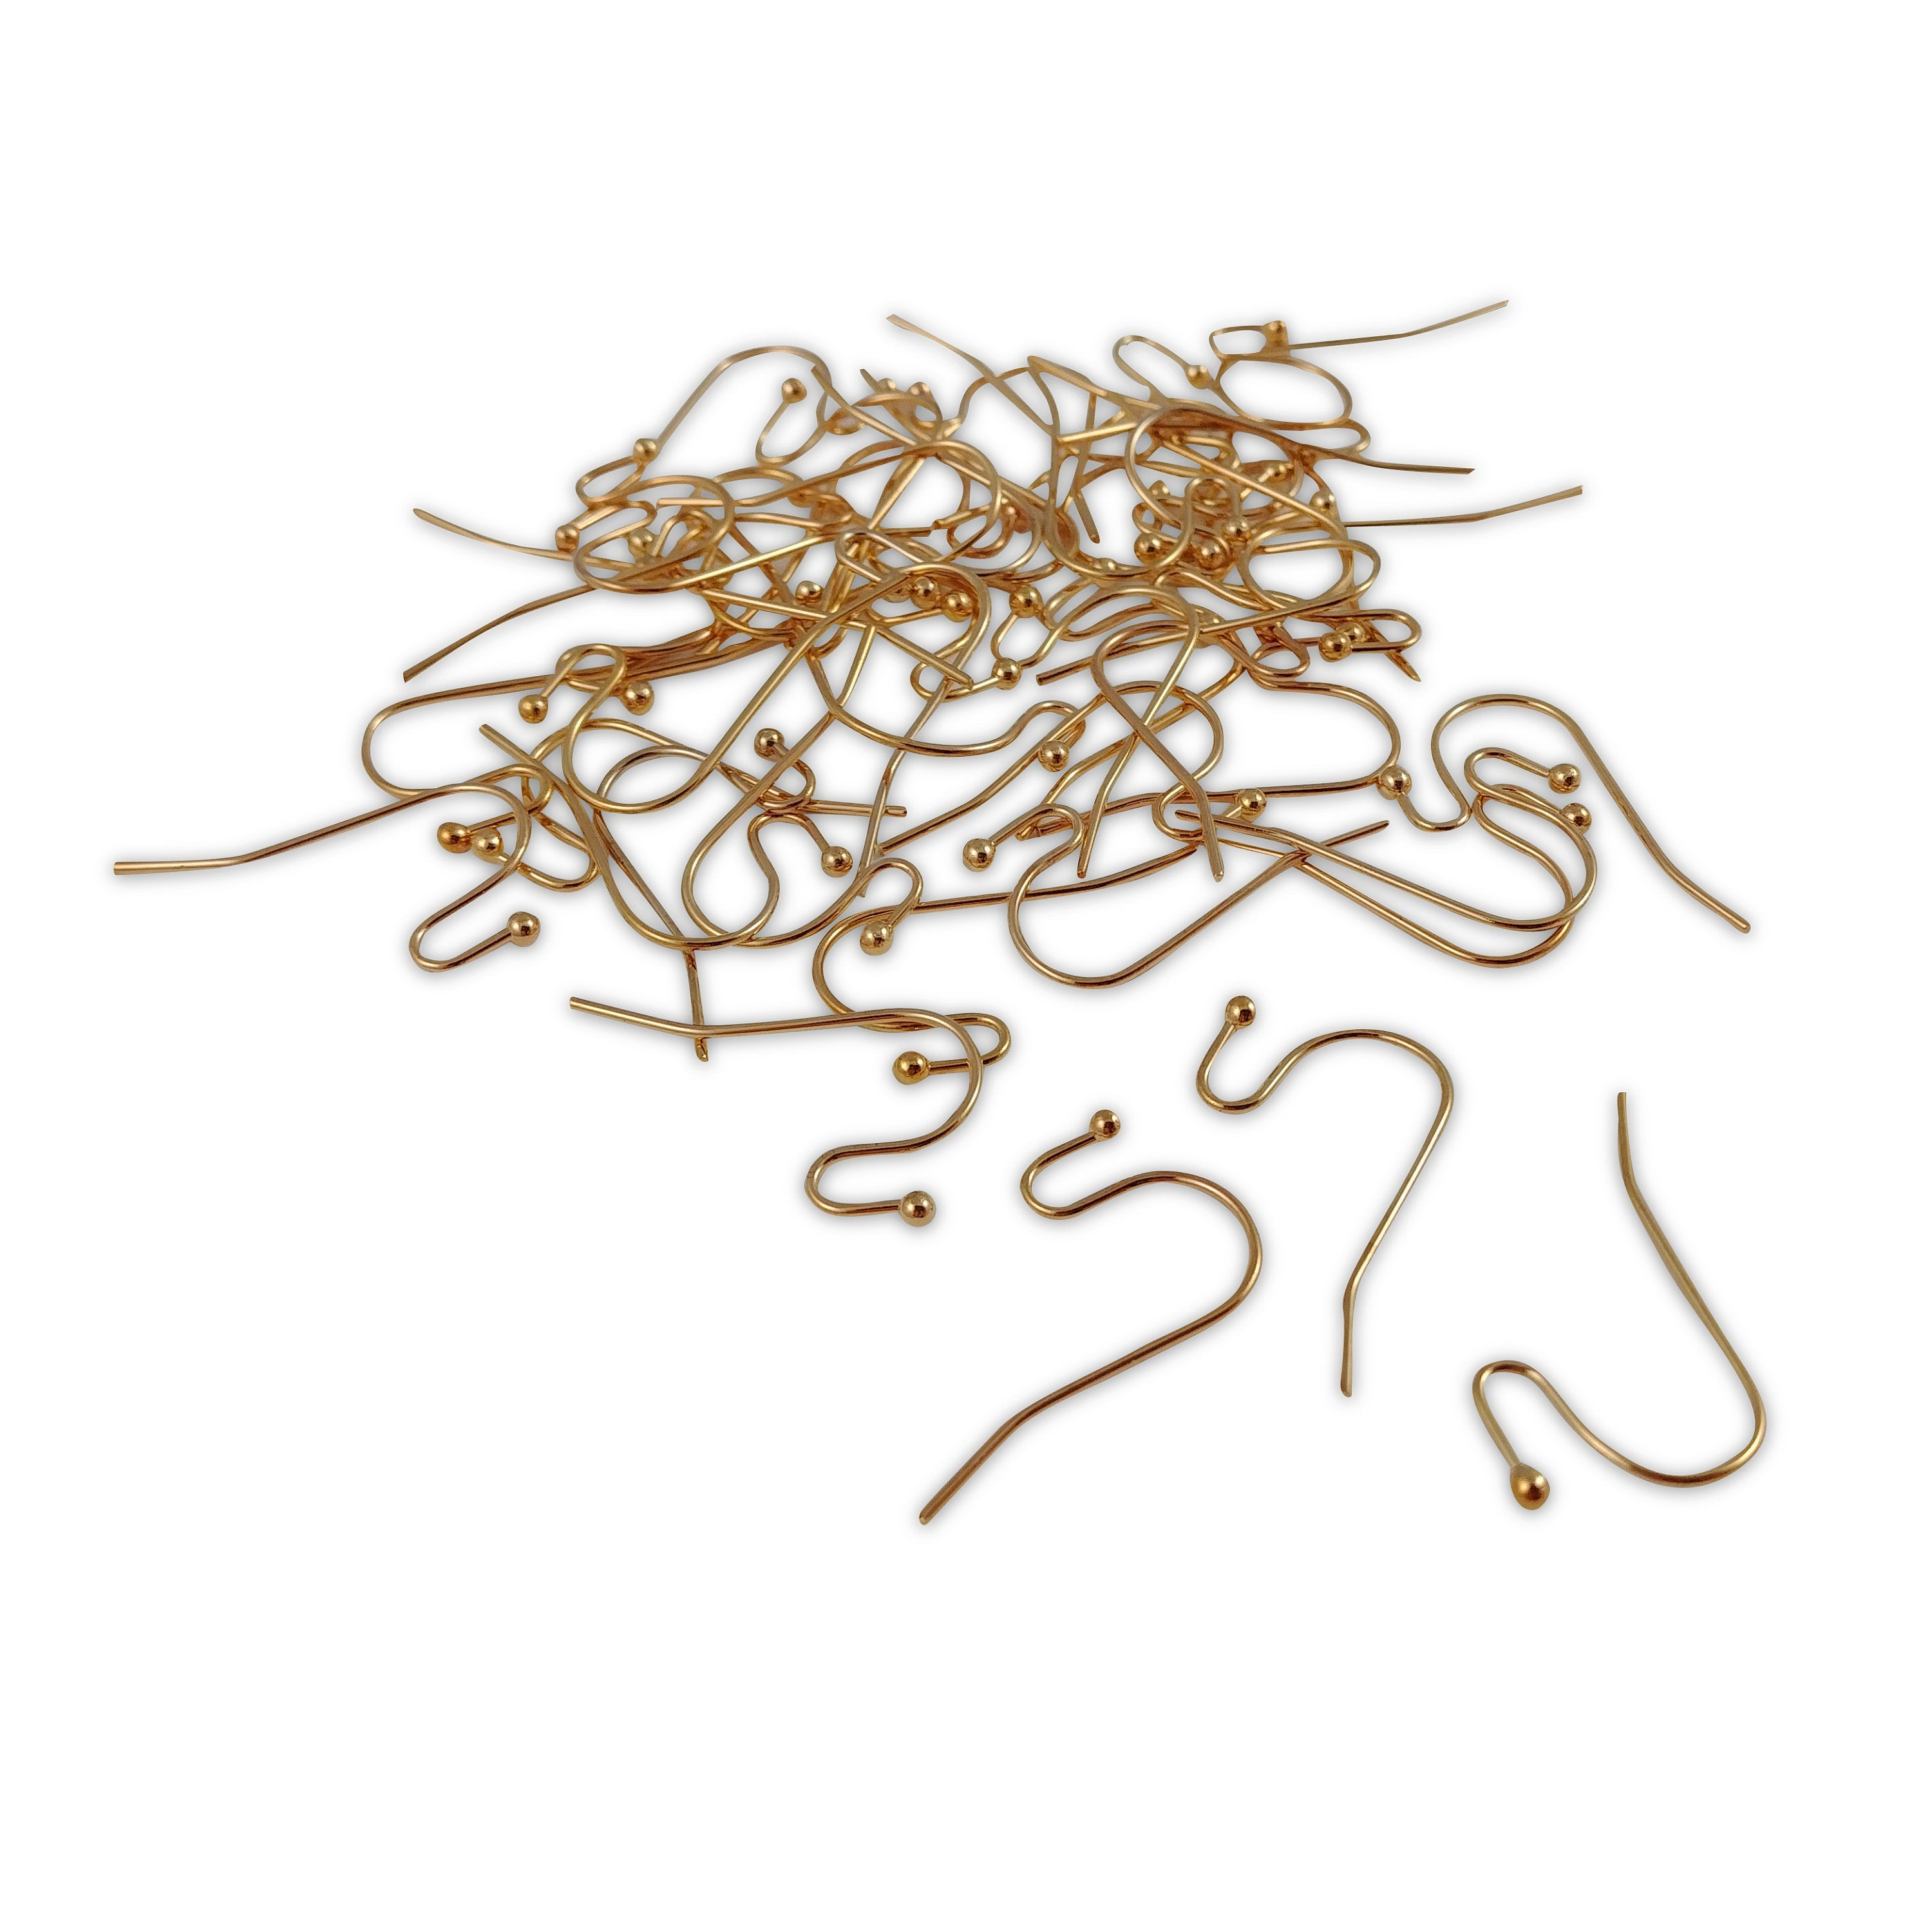 Gold stainless steel ear wire hooks 50 pcs (25 pairs) Hypoallergenic 20mm